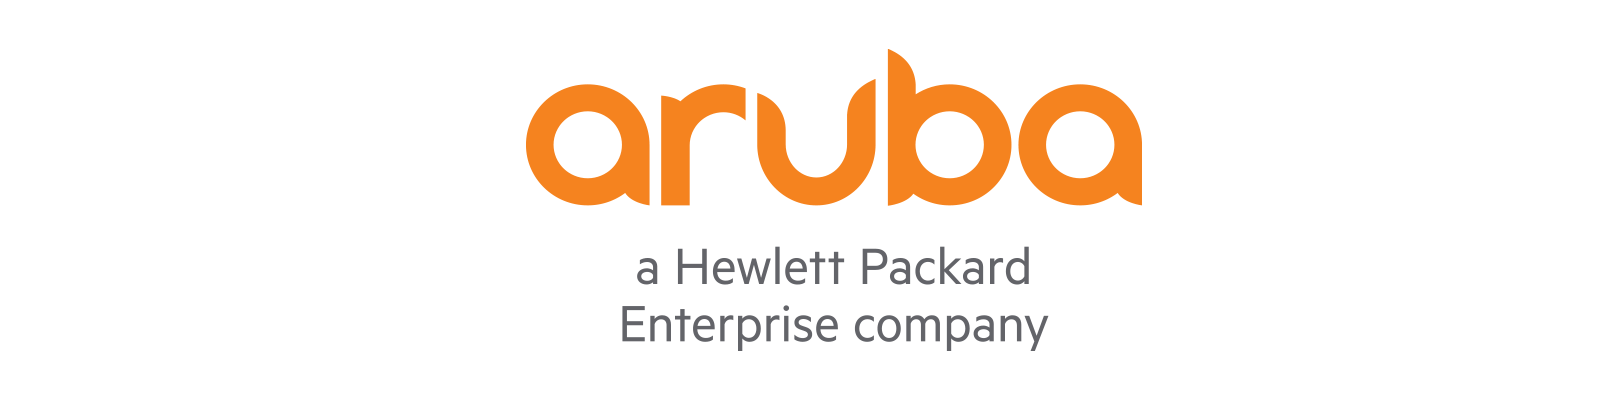 HP Cloud Logo - Aruba | Enterprise Networking and Security Solutions